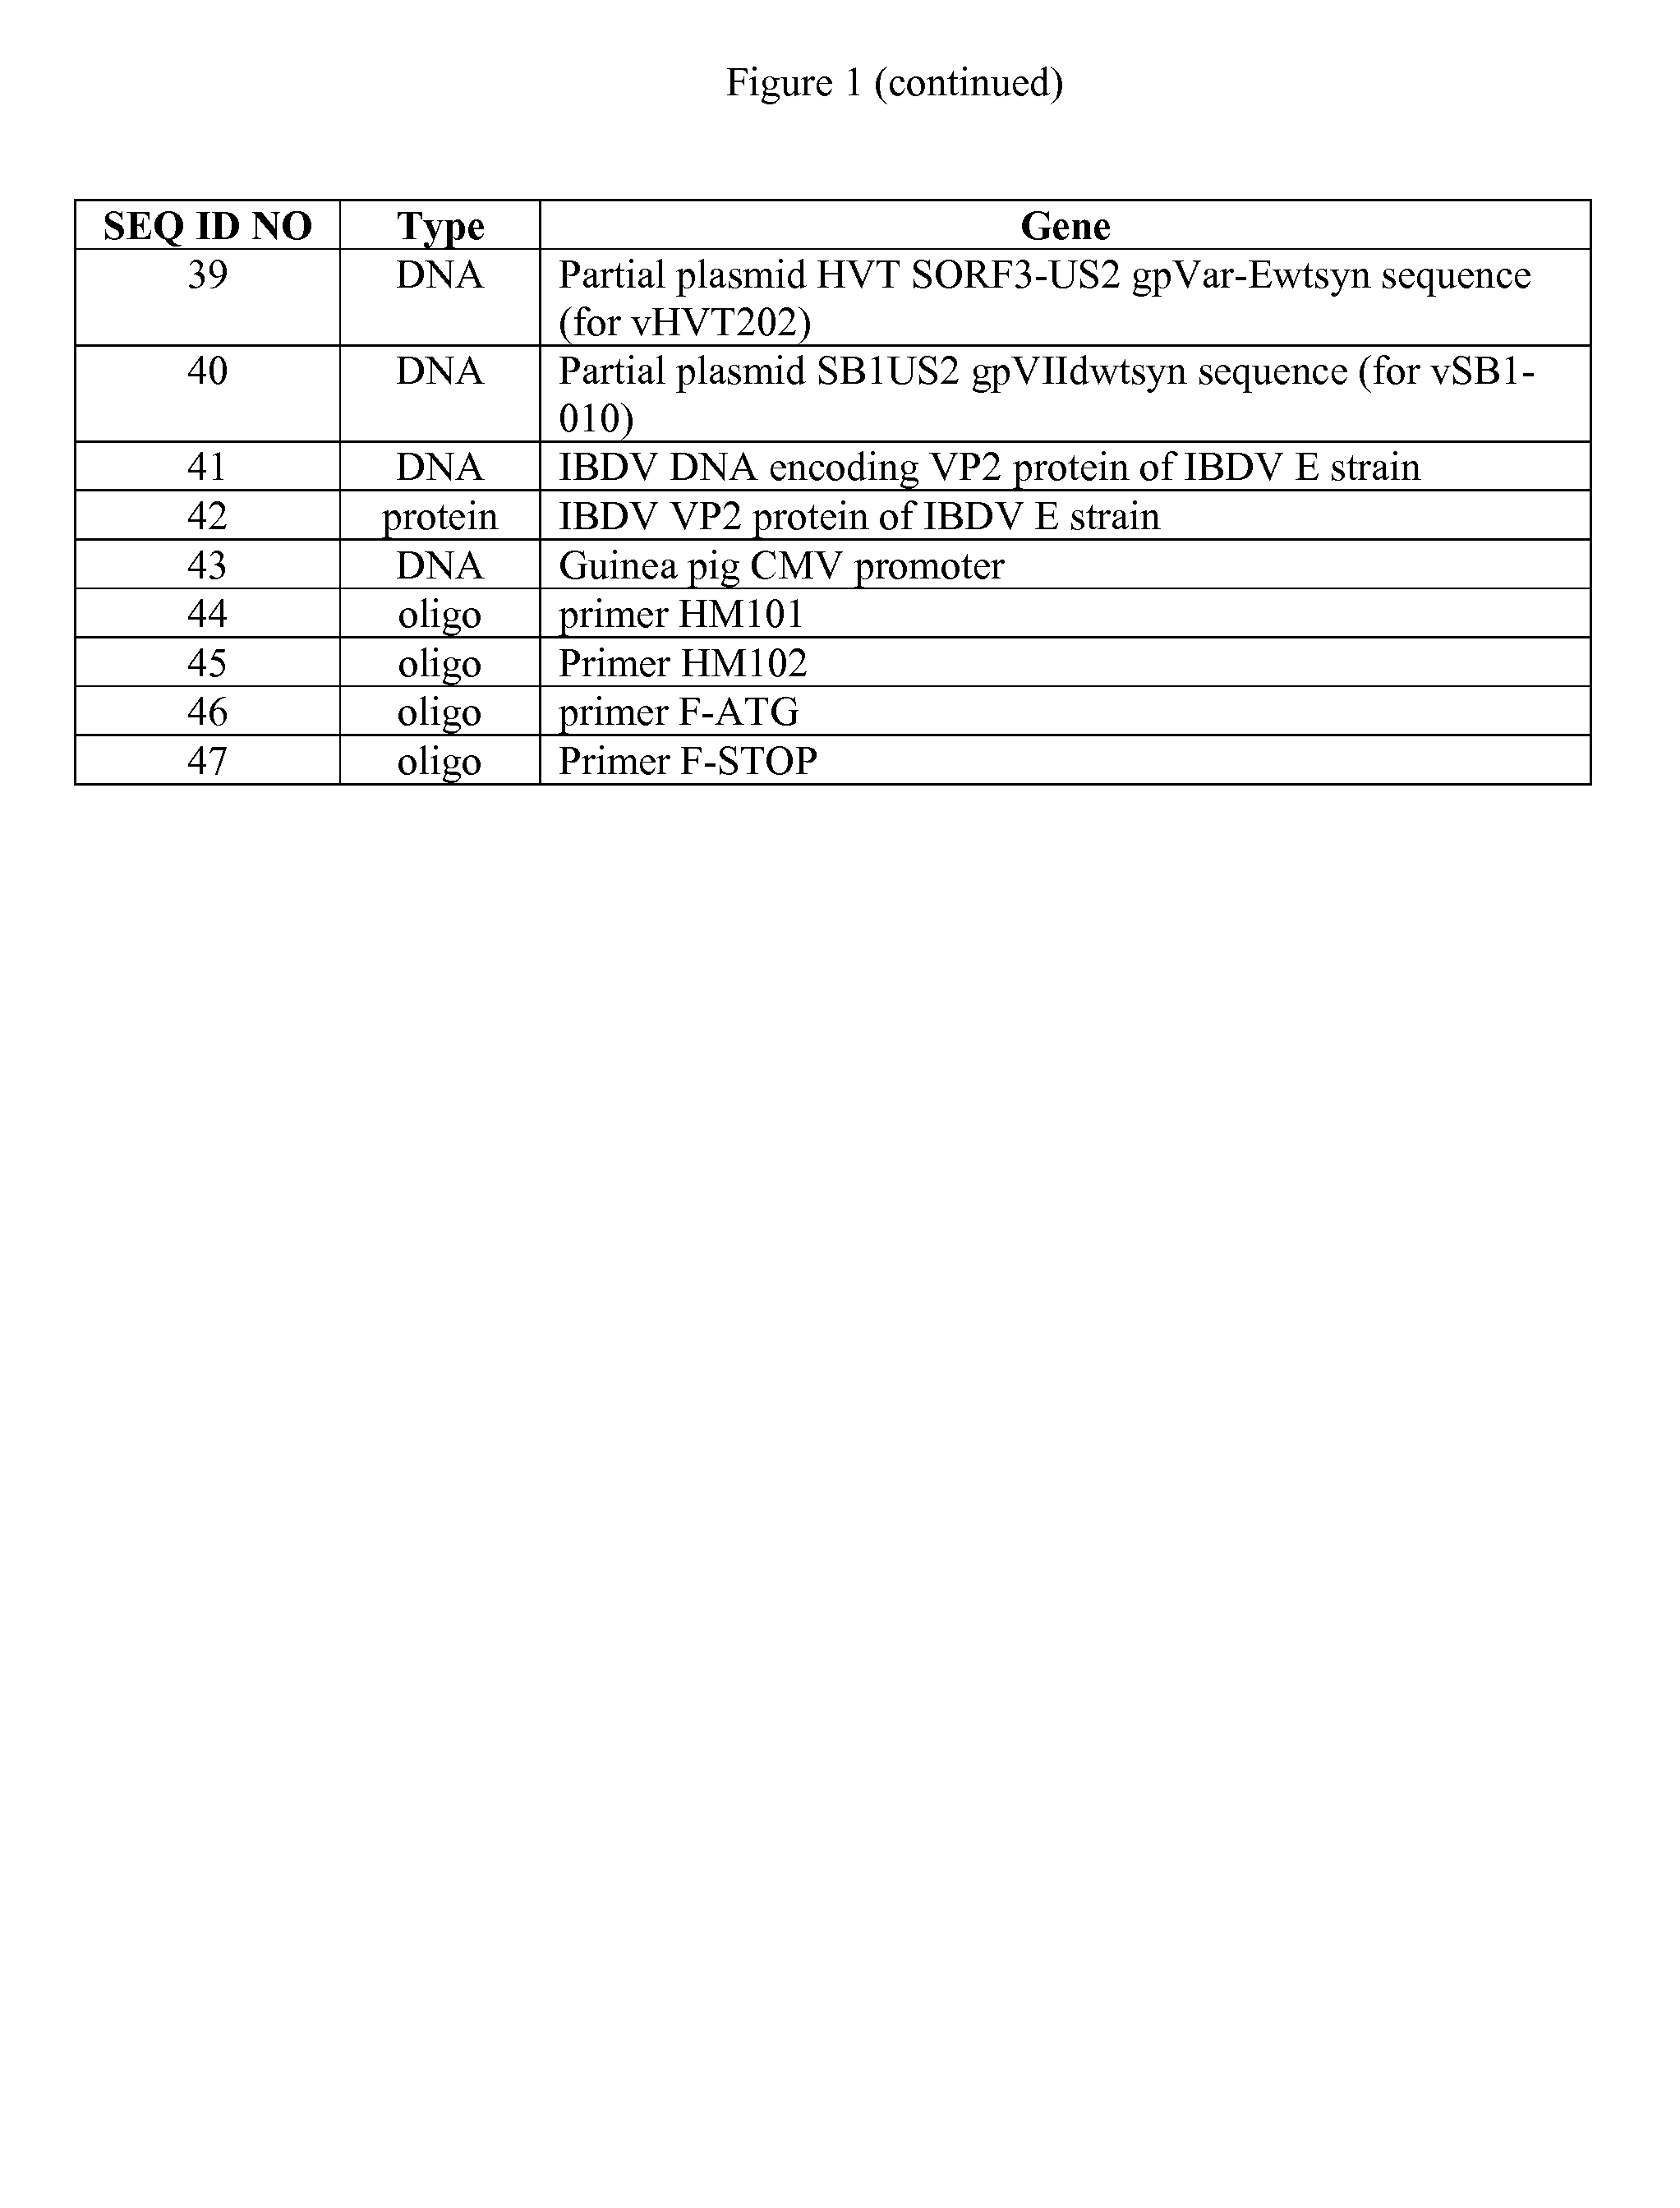 Recombinant HVT vectors expressing antigens of avian pathogens and uses thereof